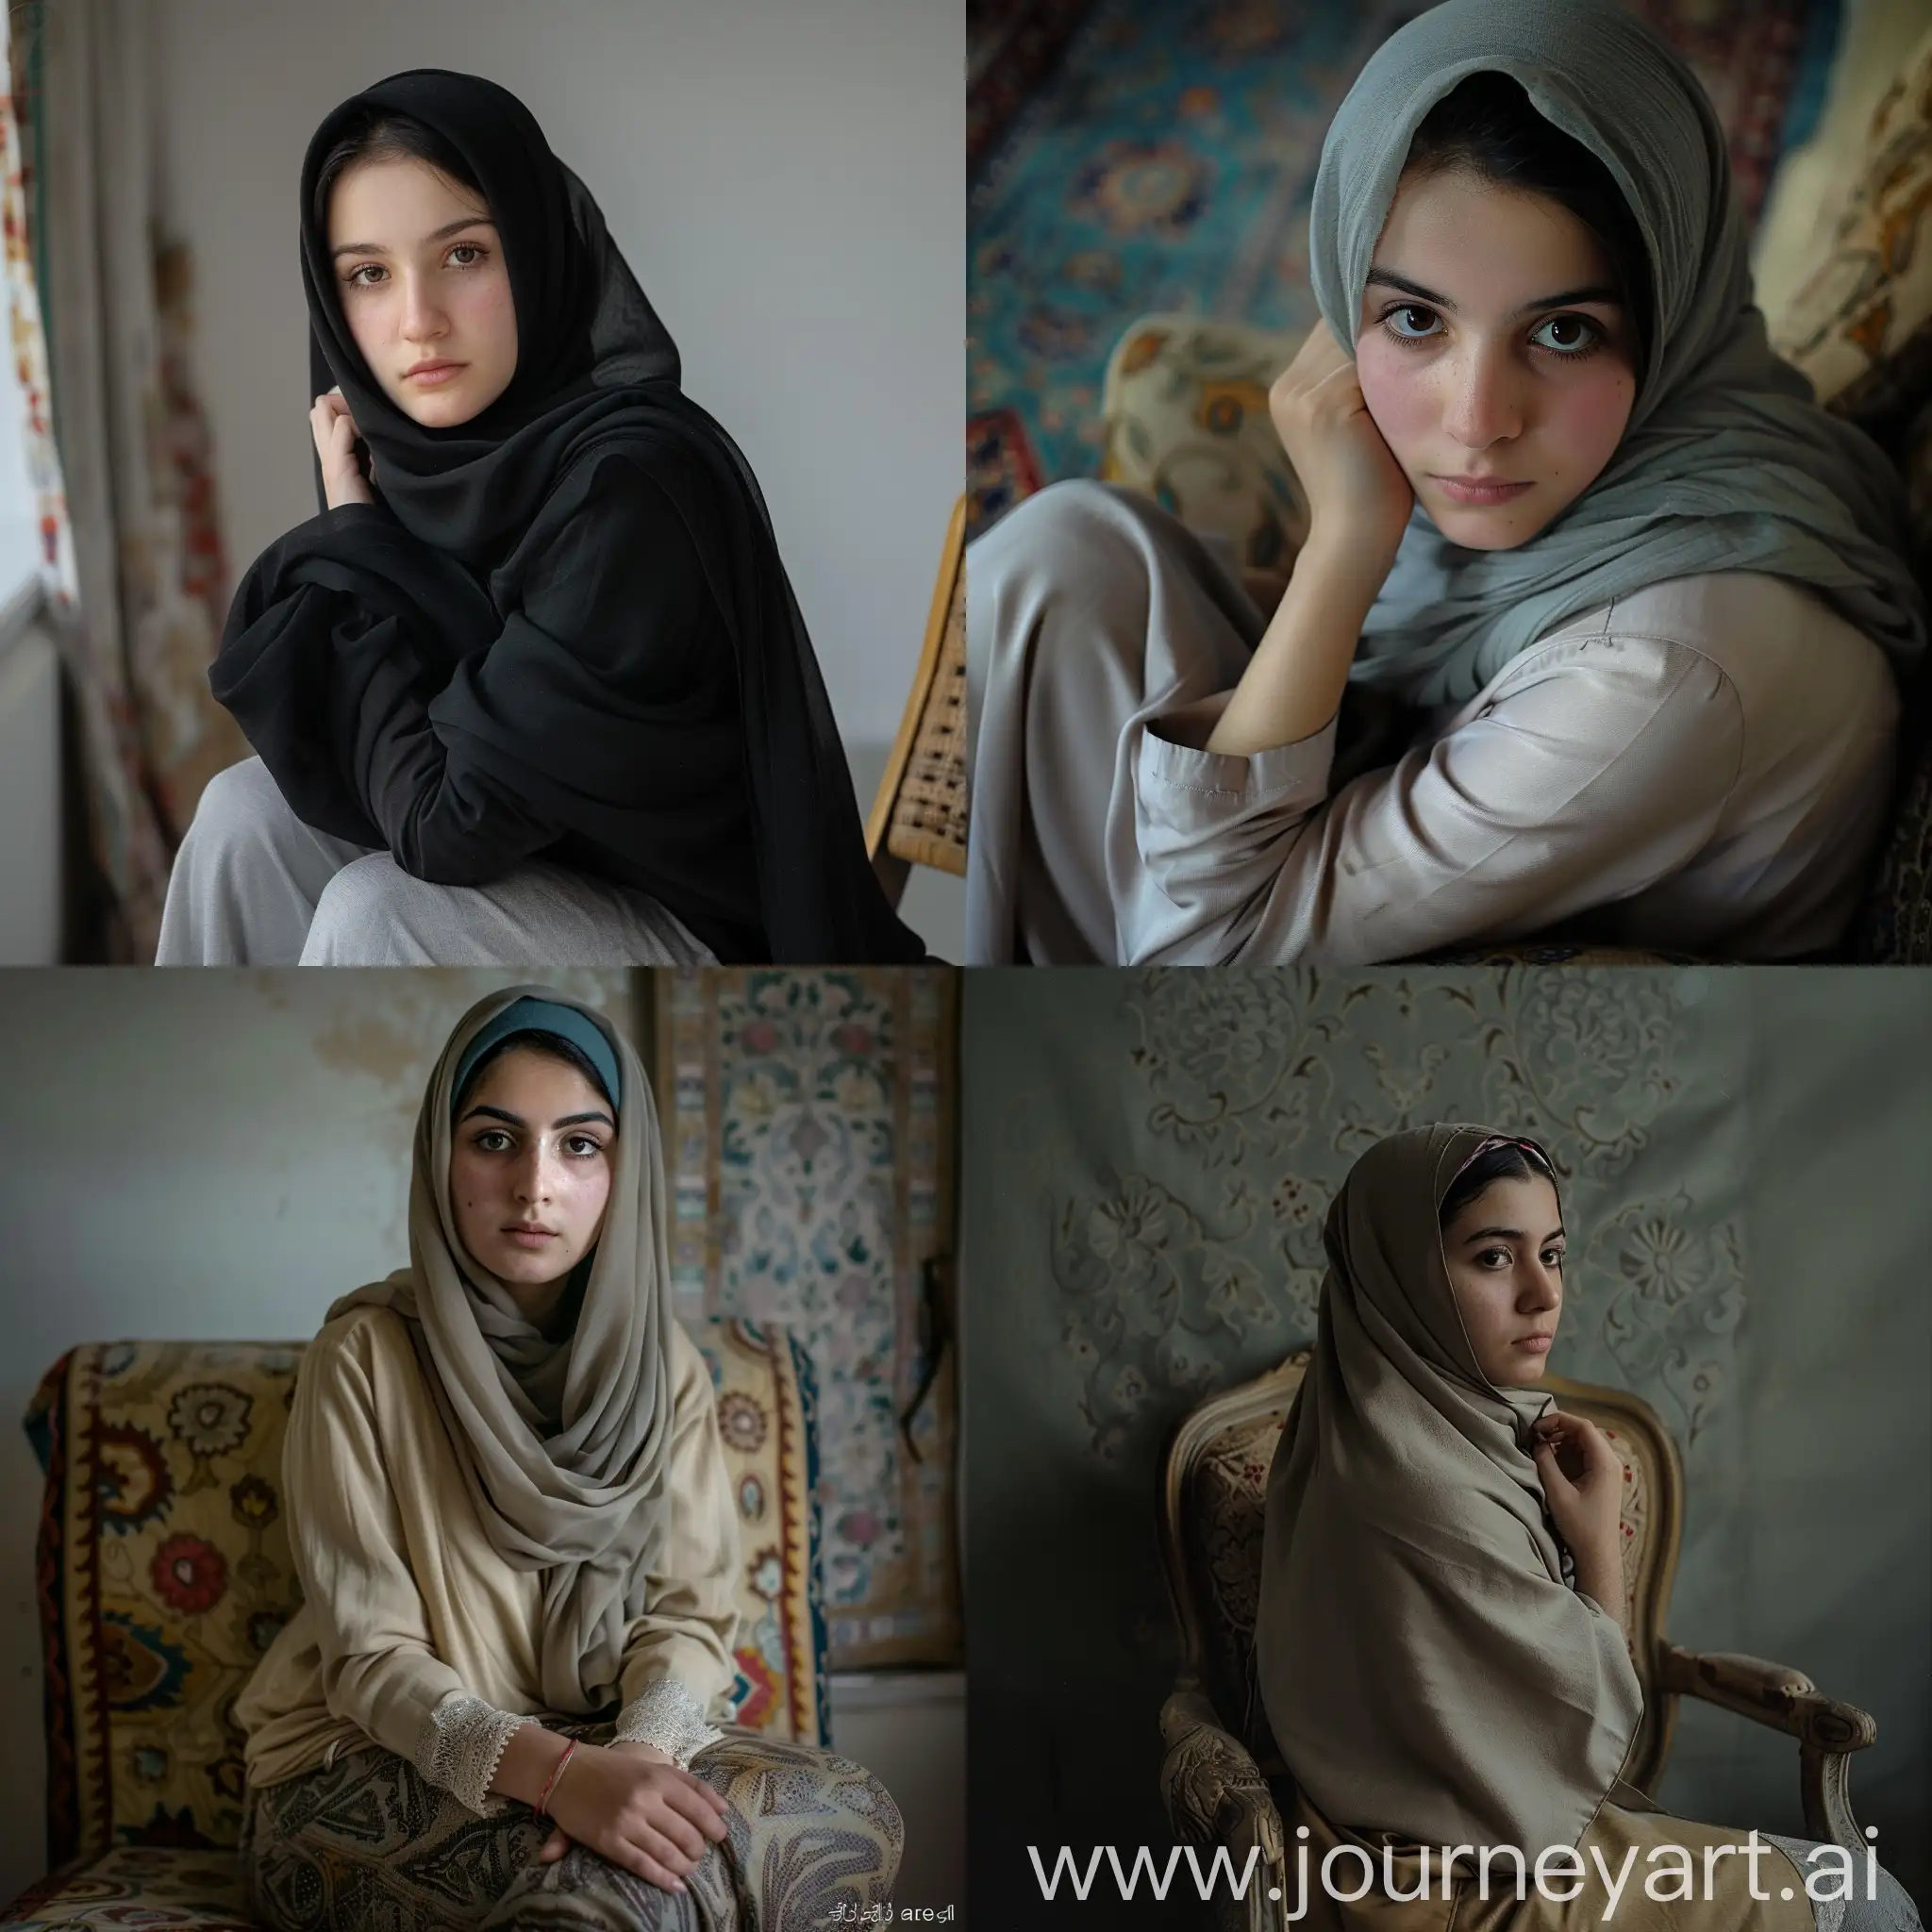 Young-Iranian-Woman-in-Hijab-Sitting-on-Chair